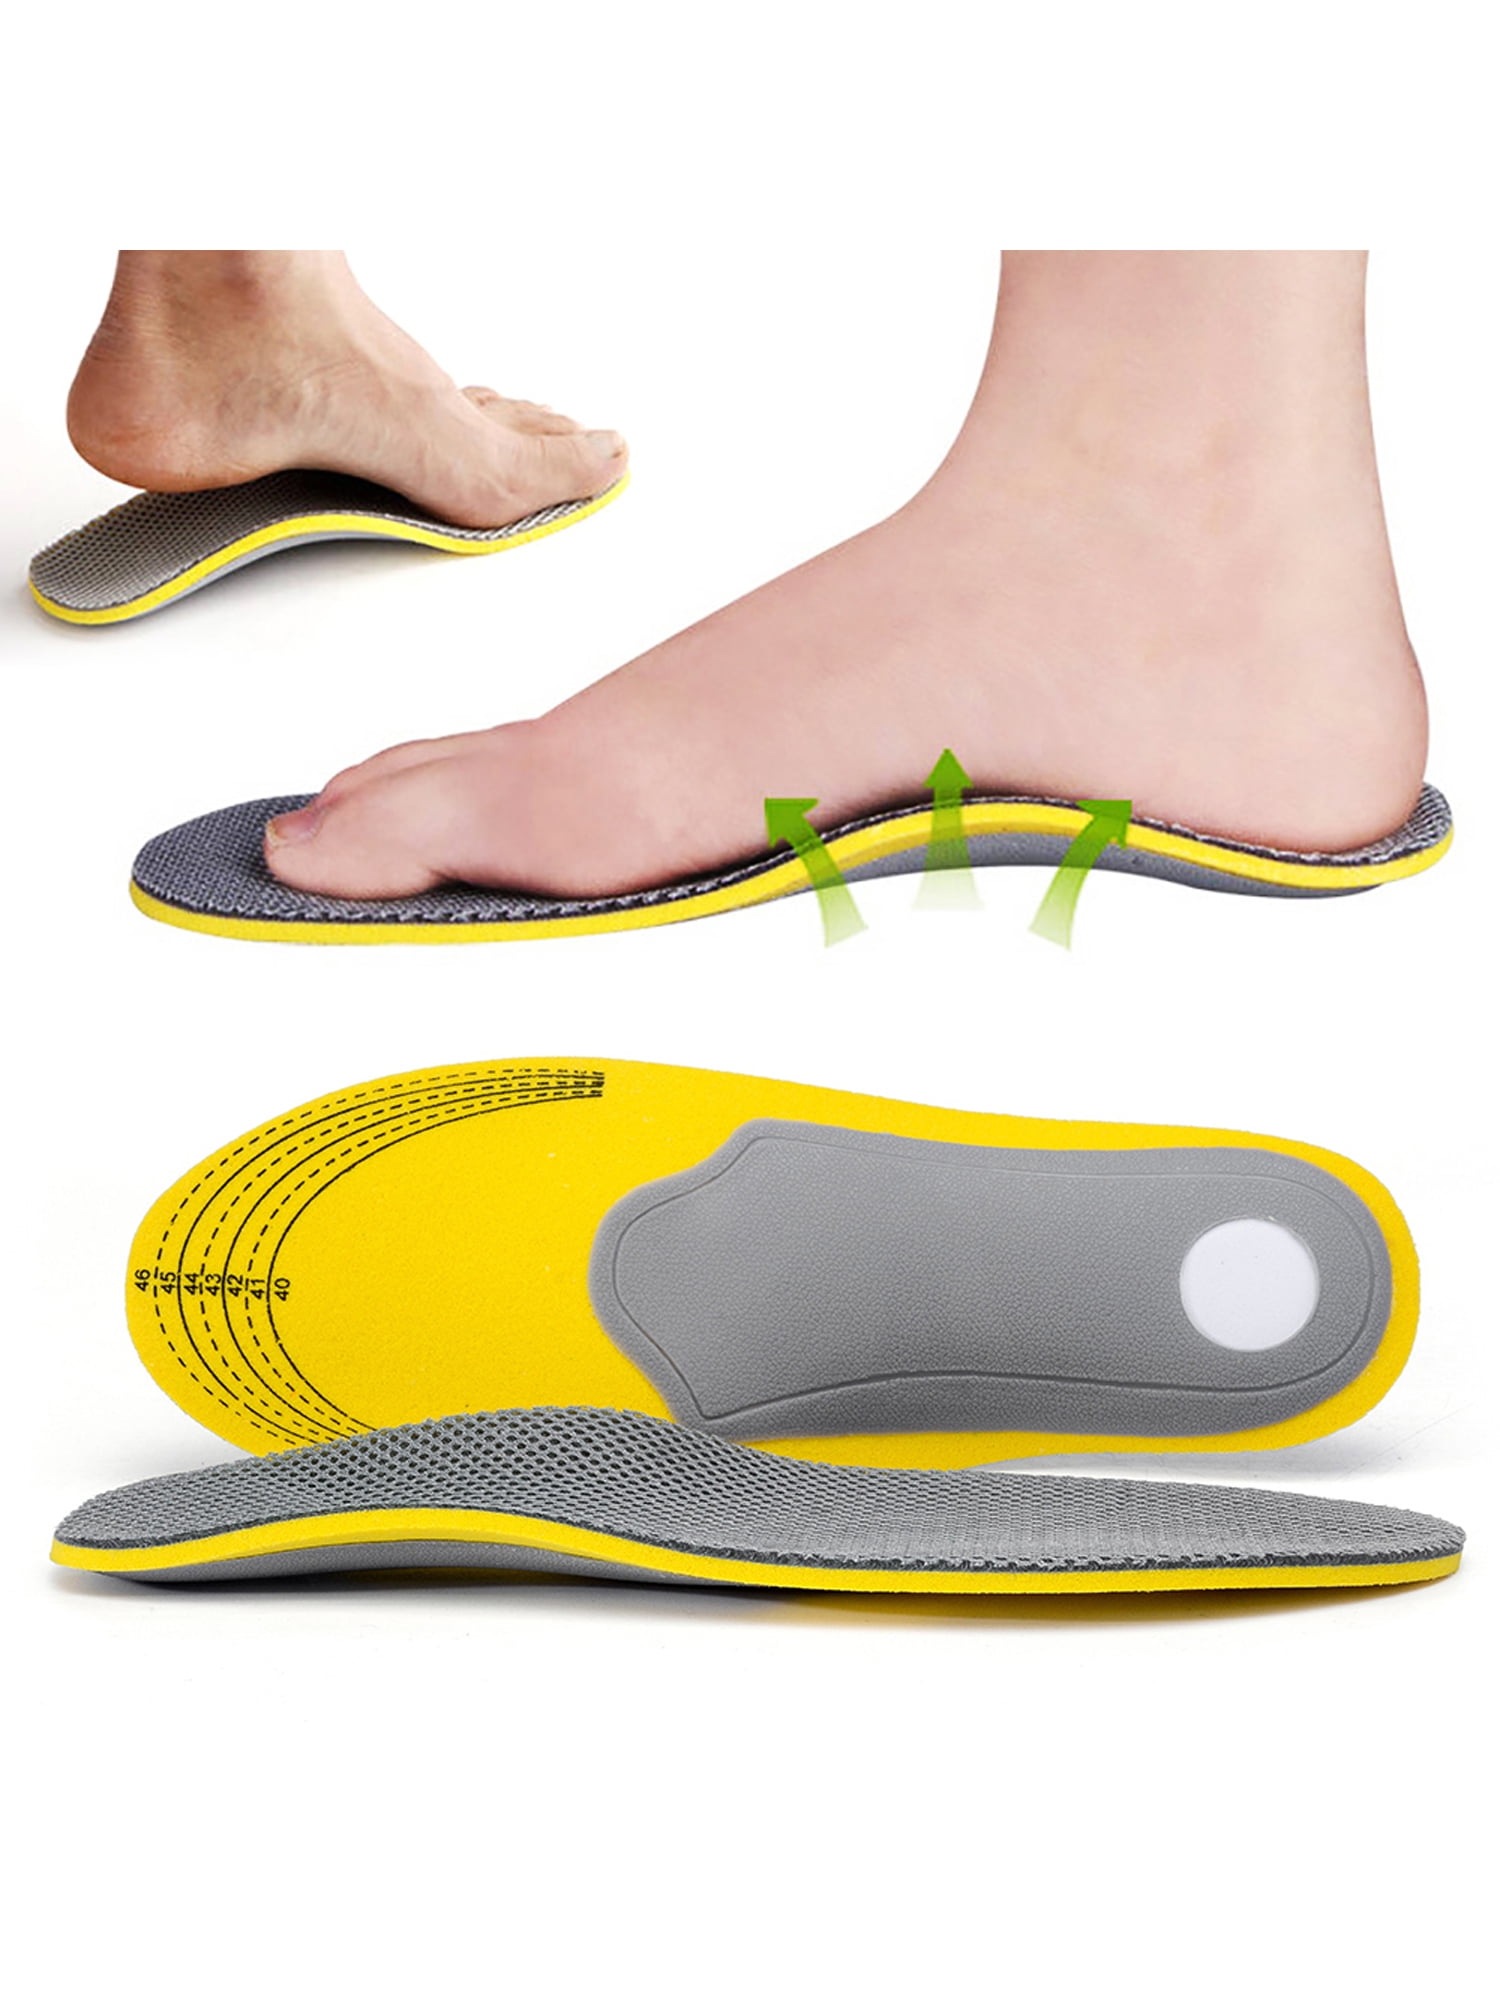 OwnShoe Sports Insole Shock Absorption Sweat Deodorant Breathable ...